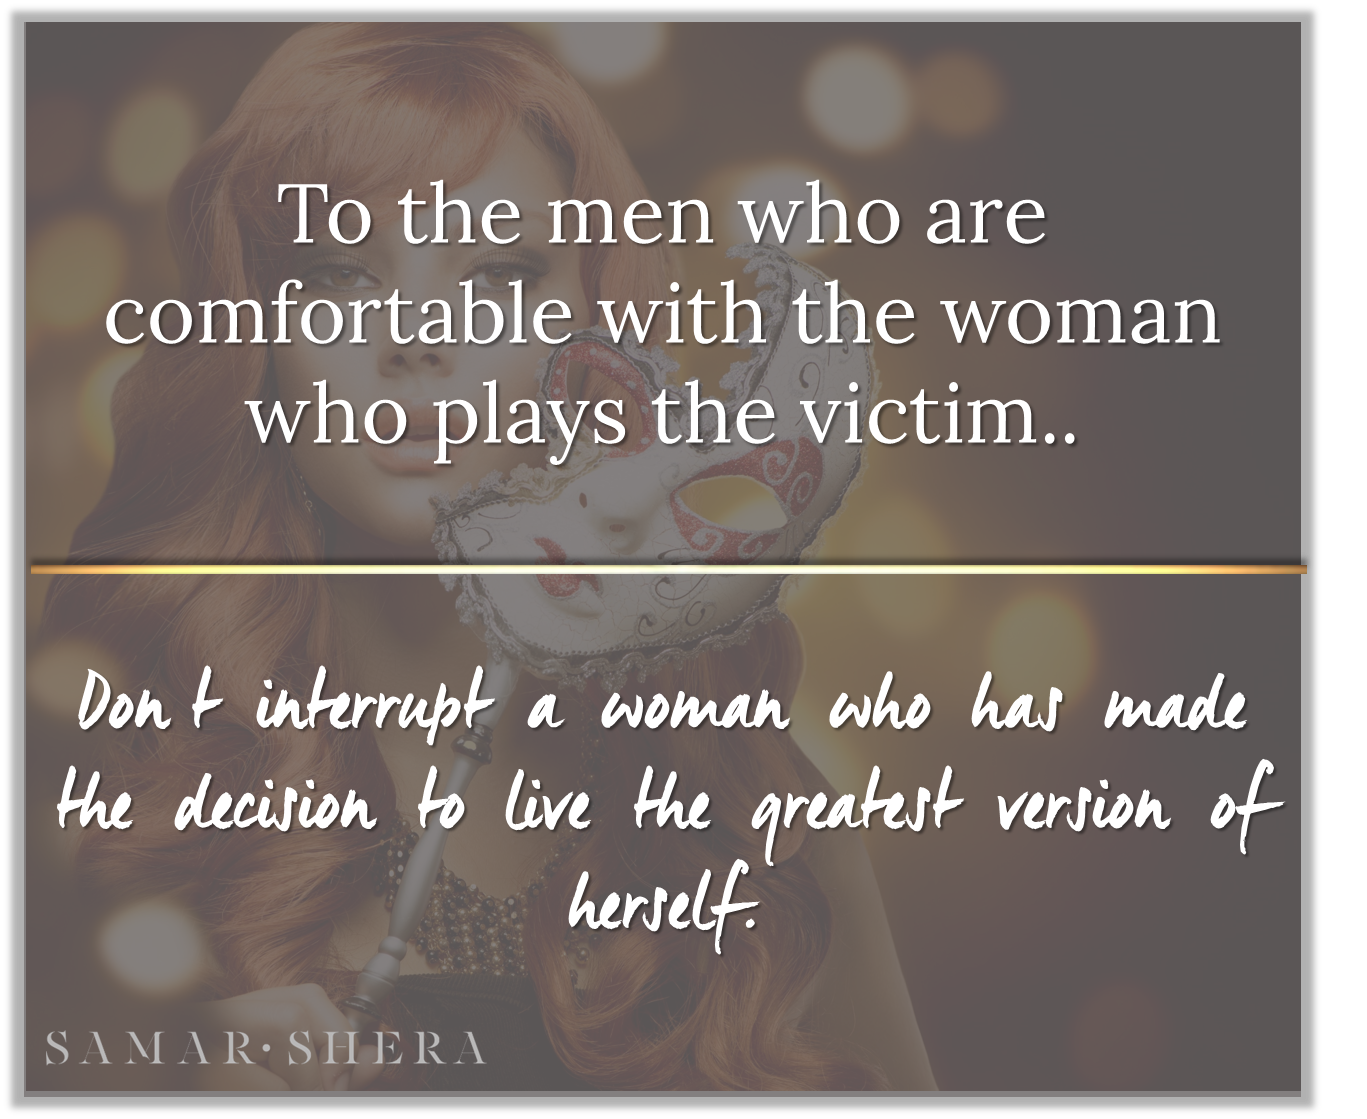 To men who are comfortable with the woman who plays the victim